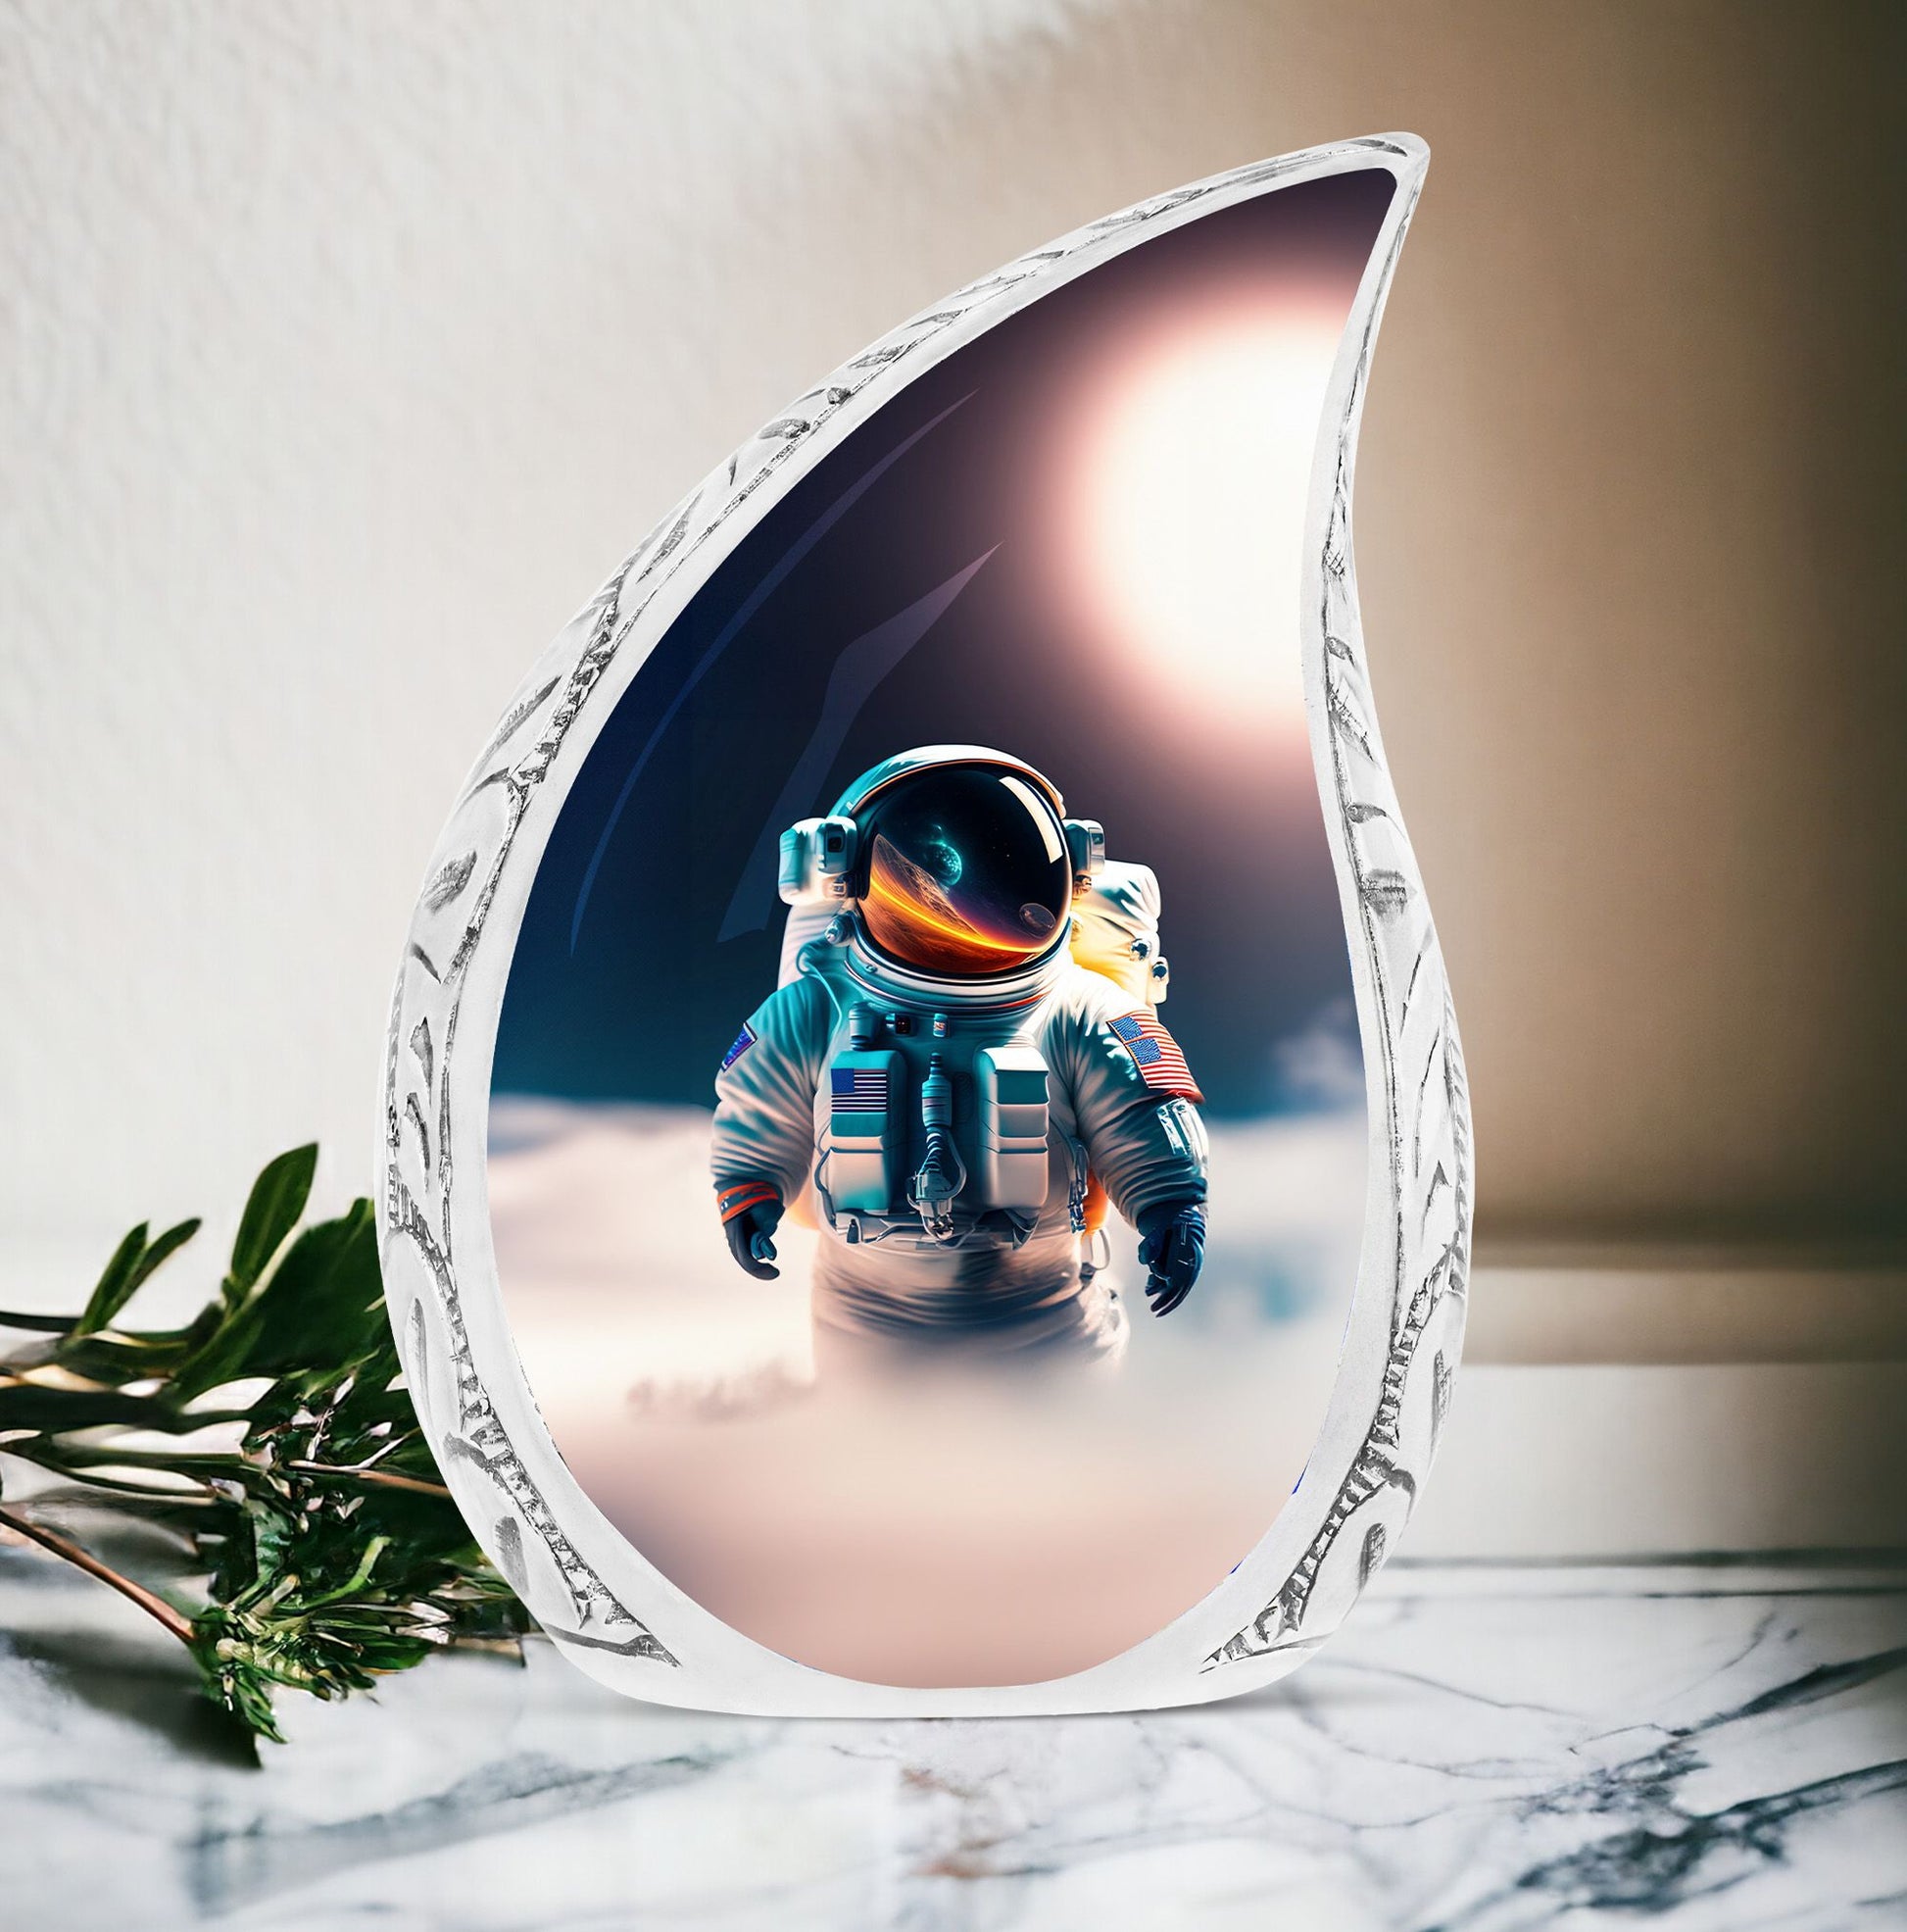 Large urn for adult ashes, featuring an astronaut and planet sunset imagery. Unique funeral urn choice for men